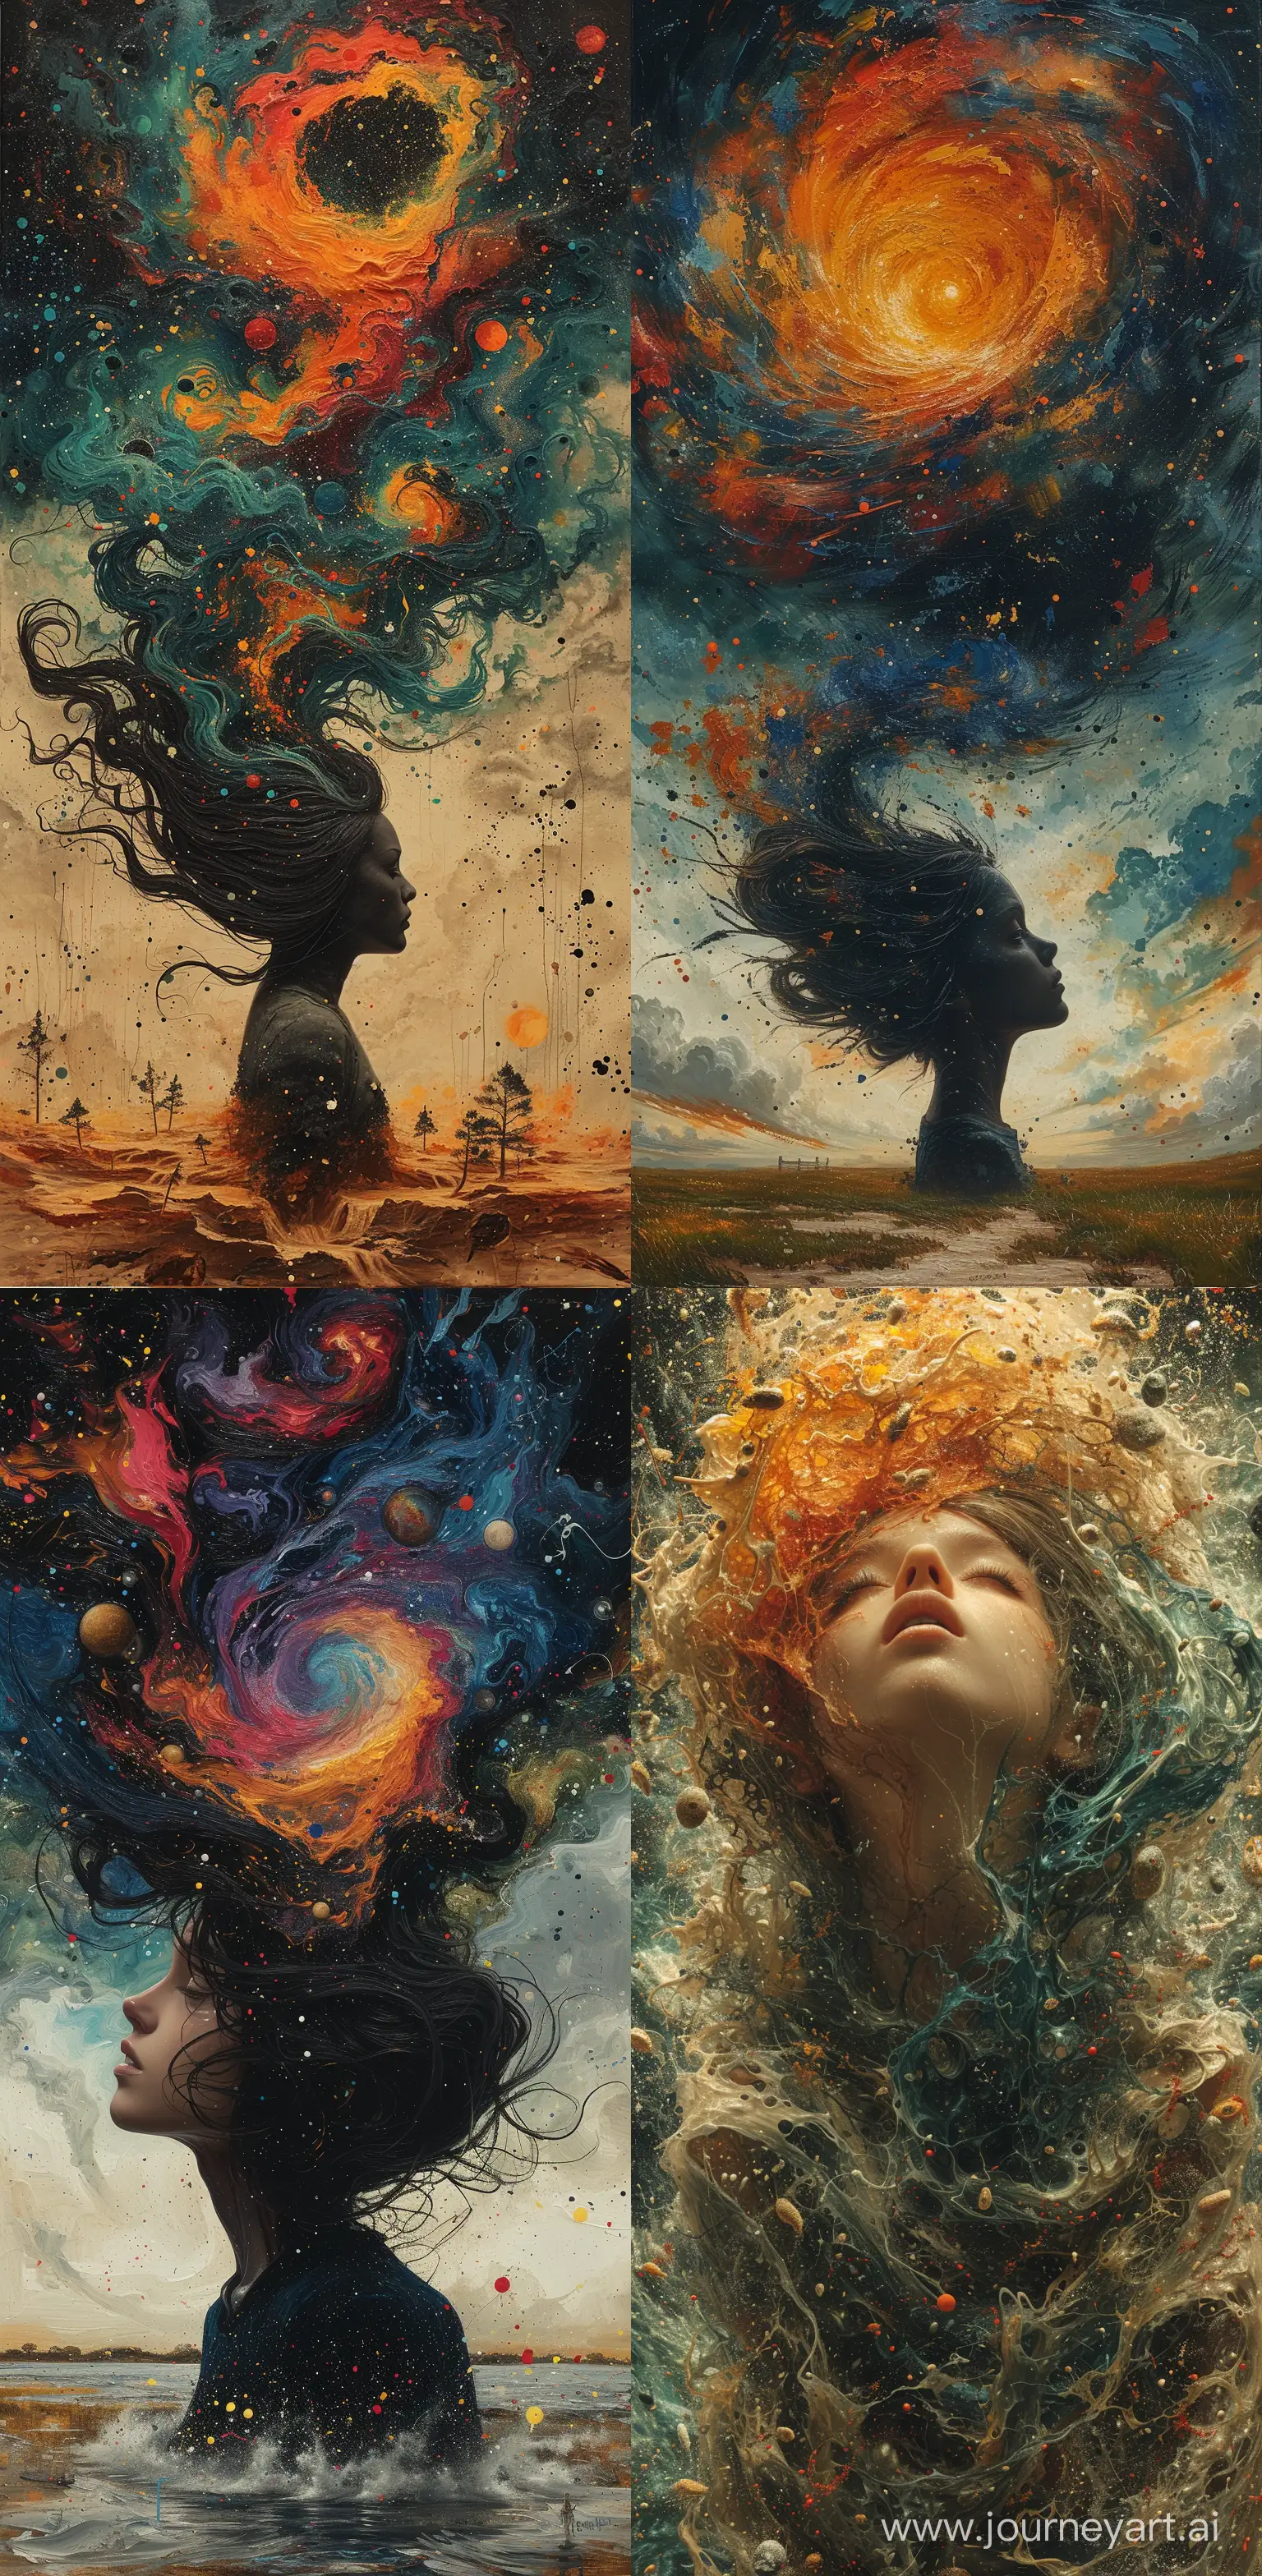 Surreal-Cosmic-Portrait-Intensely-Colorful-Figuration-with-Swirling-Colors